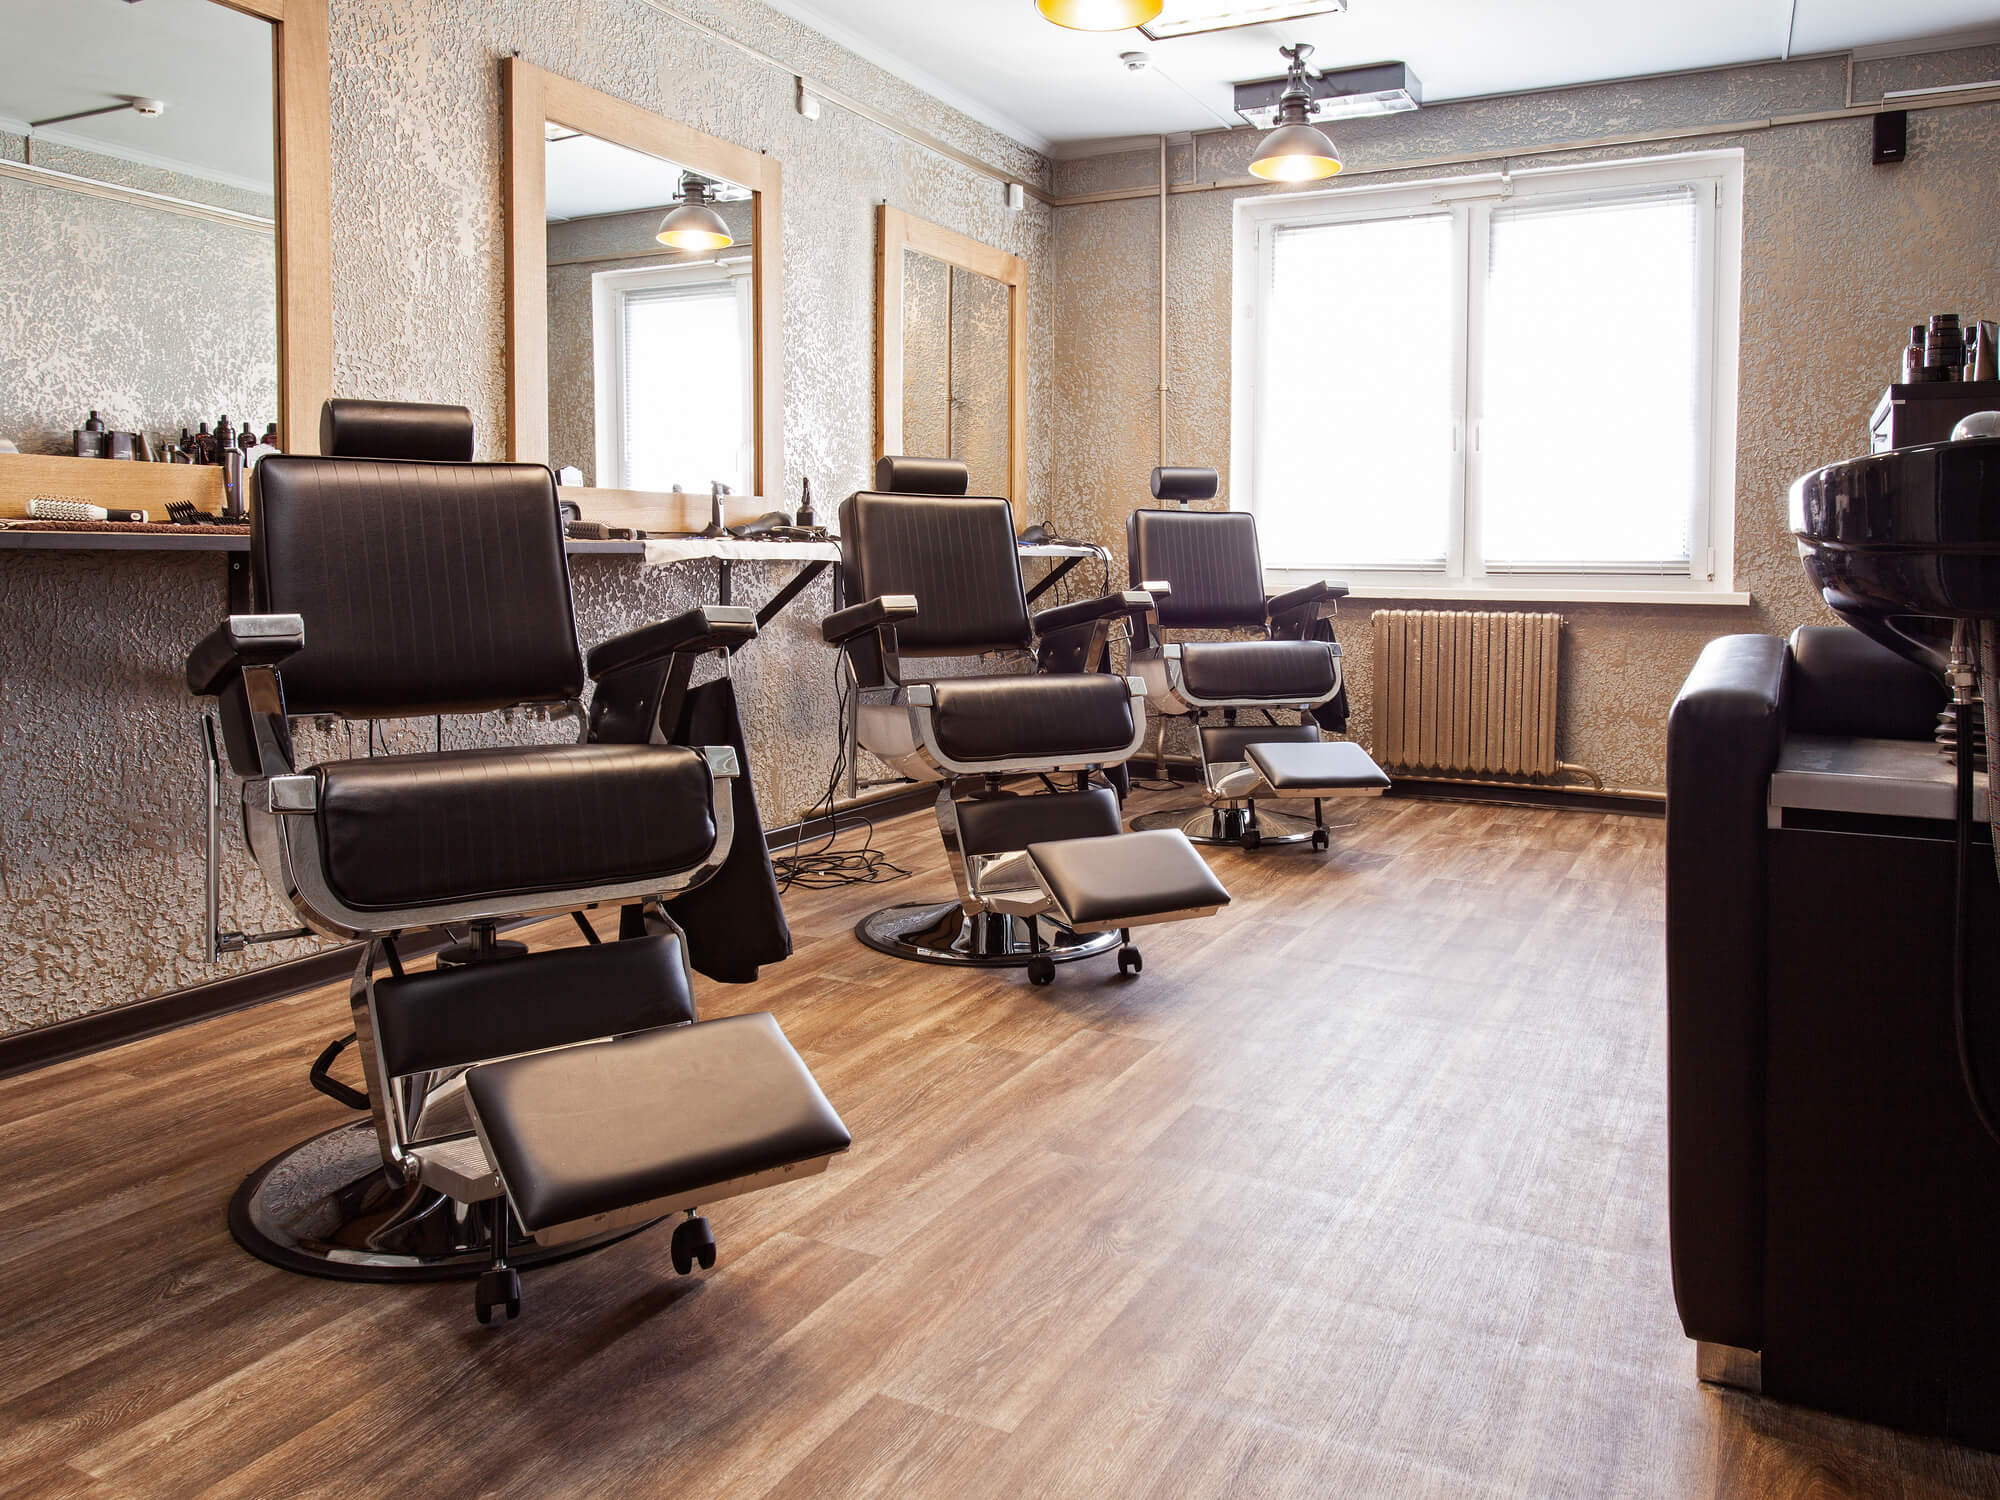 Image of salon chairs